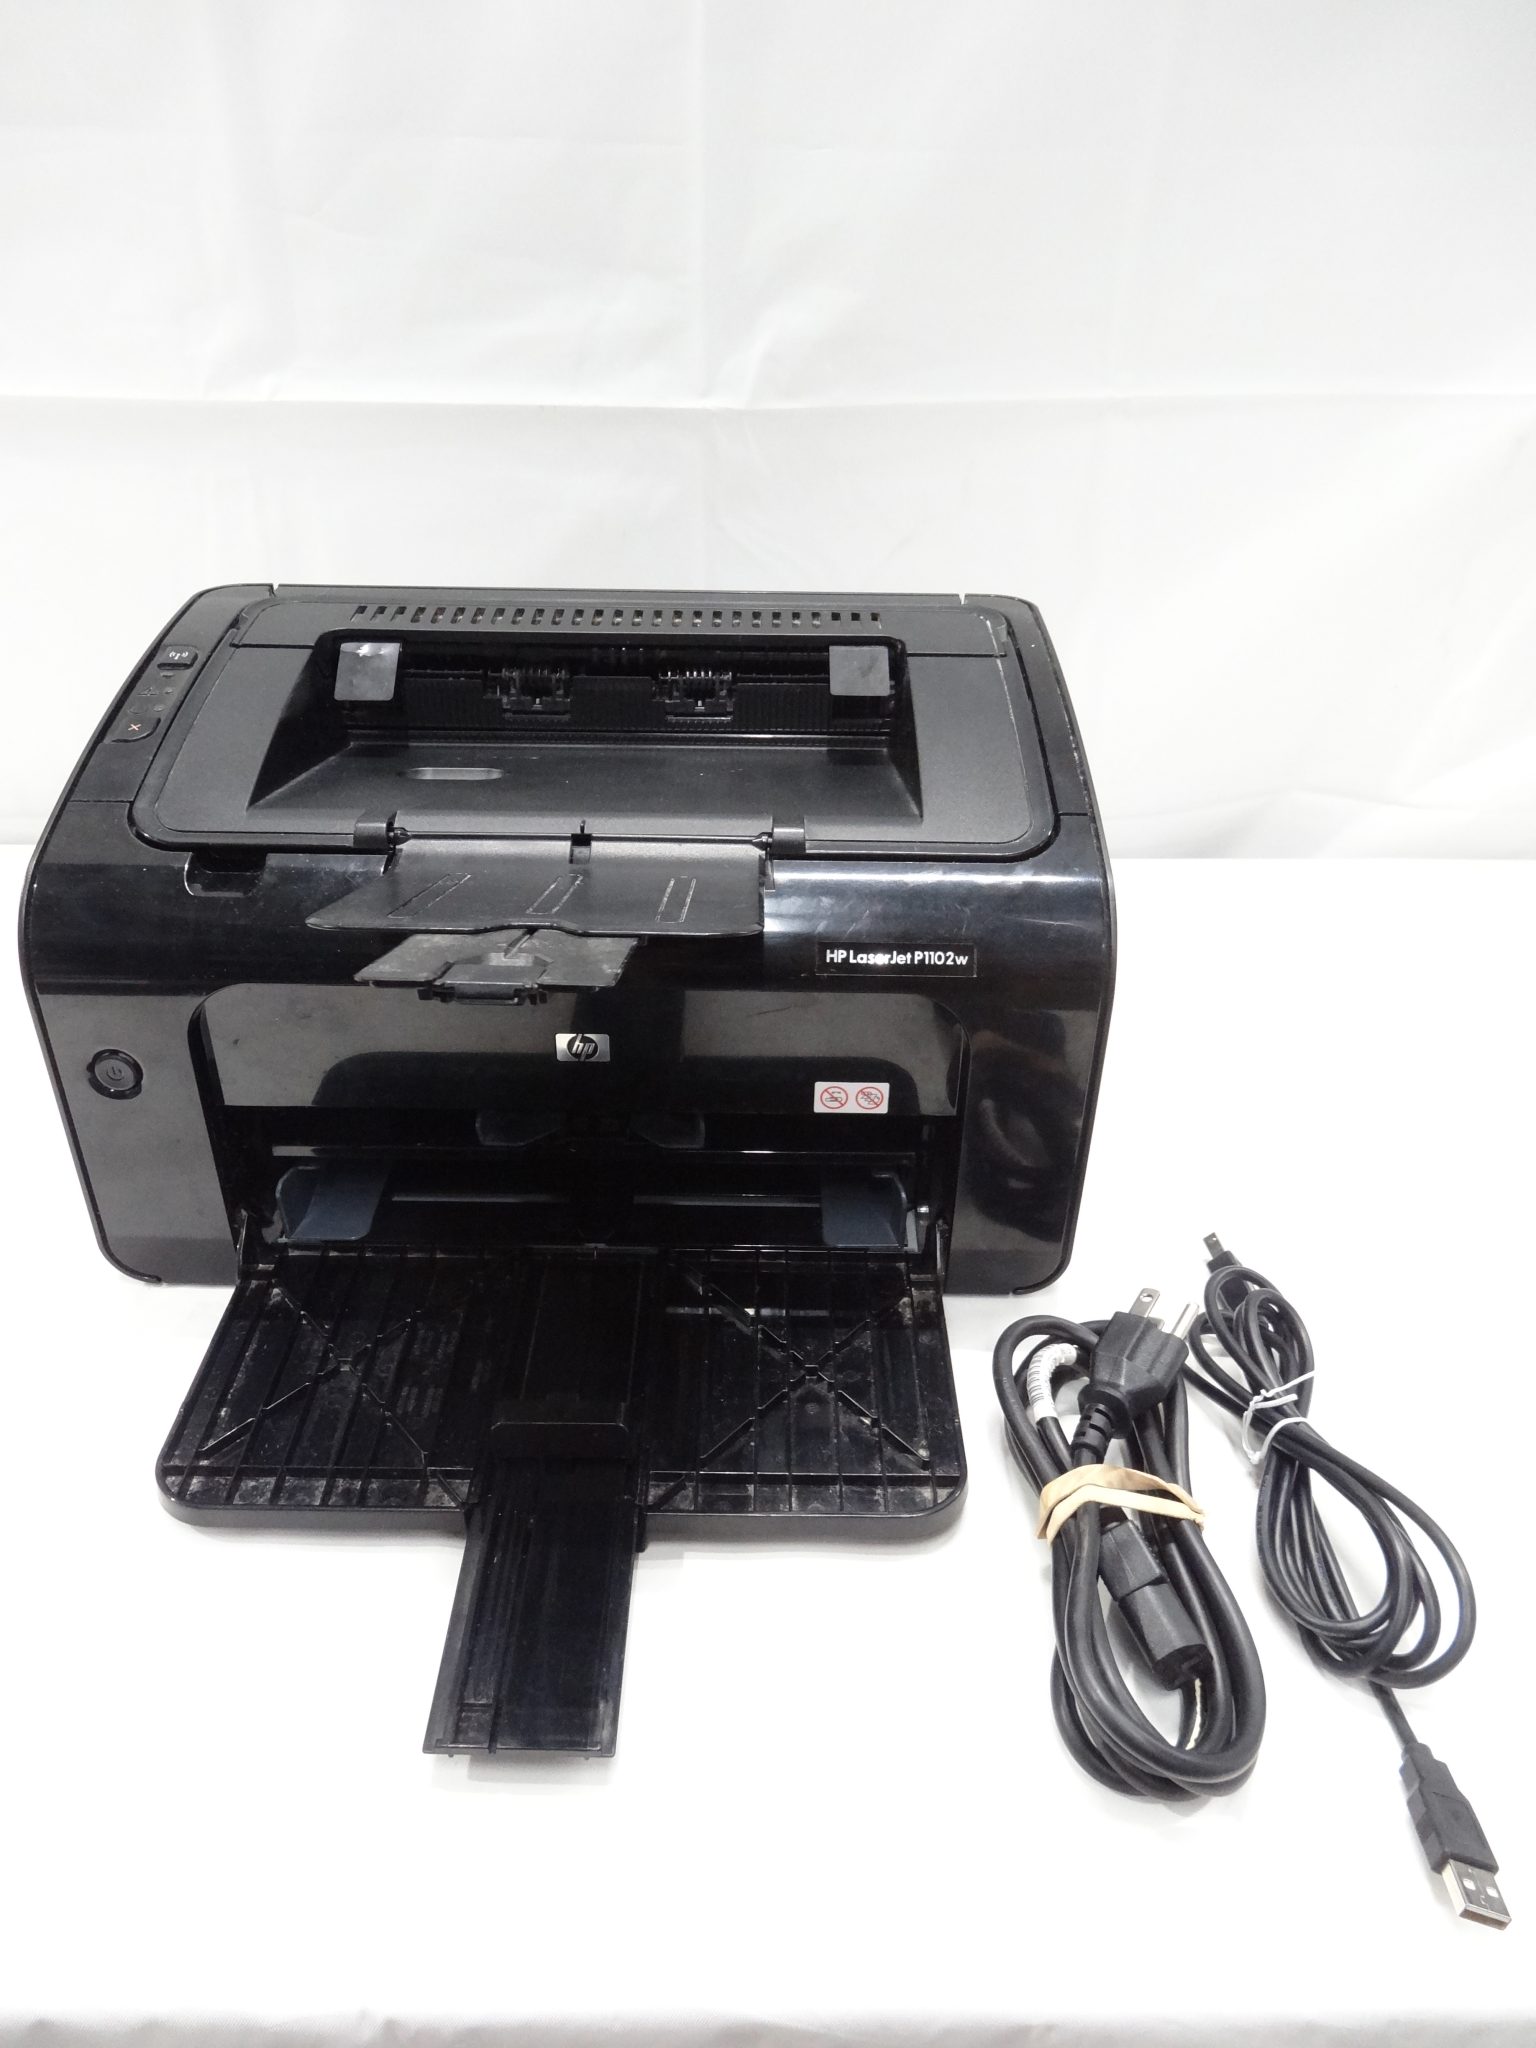 Solutions HP Pro P1102w USB Laser Printer Page Count 5,019 NO TONER CLR Solutions